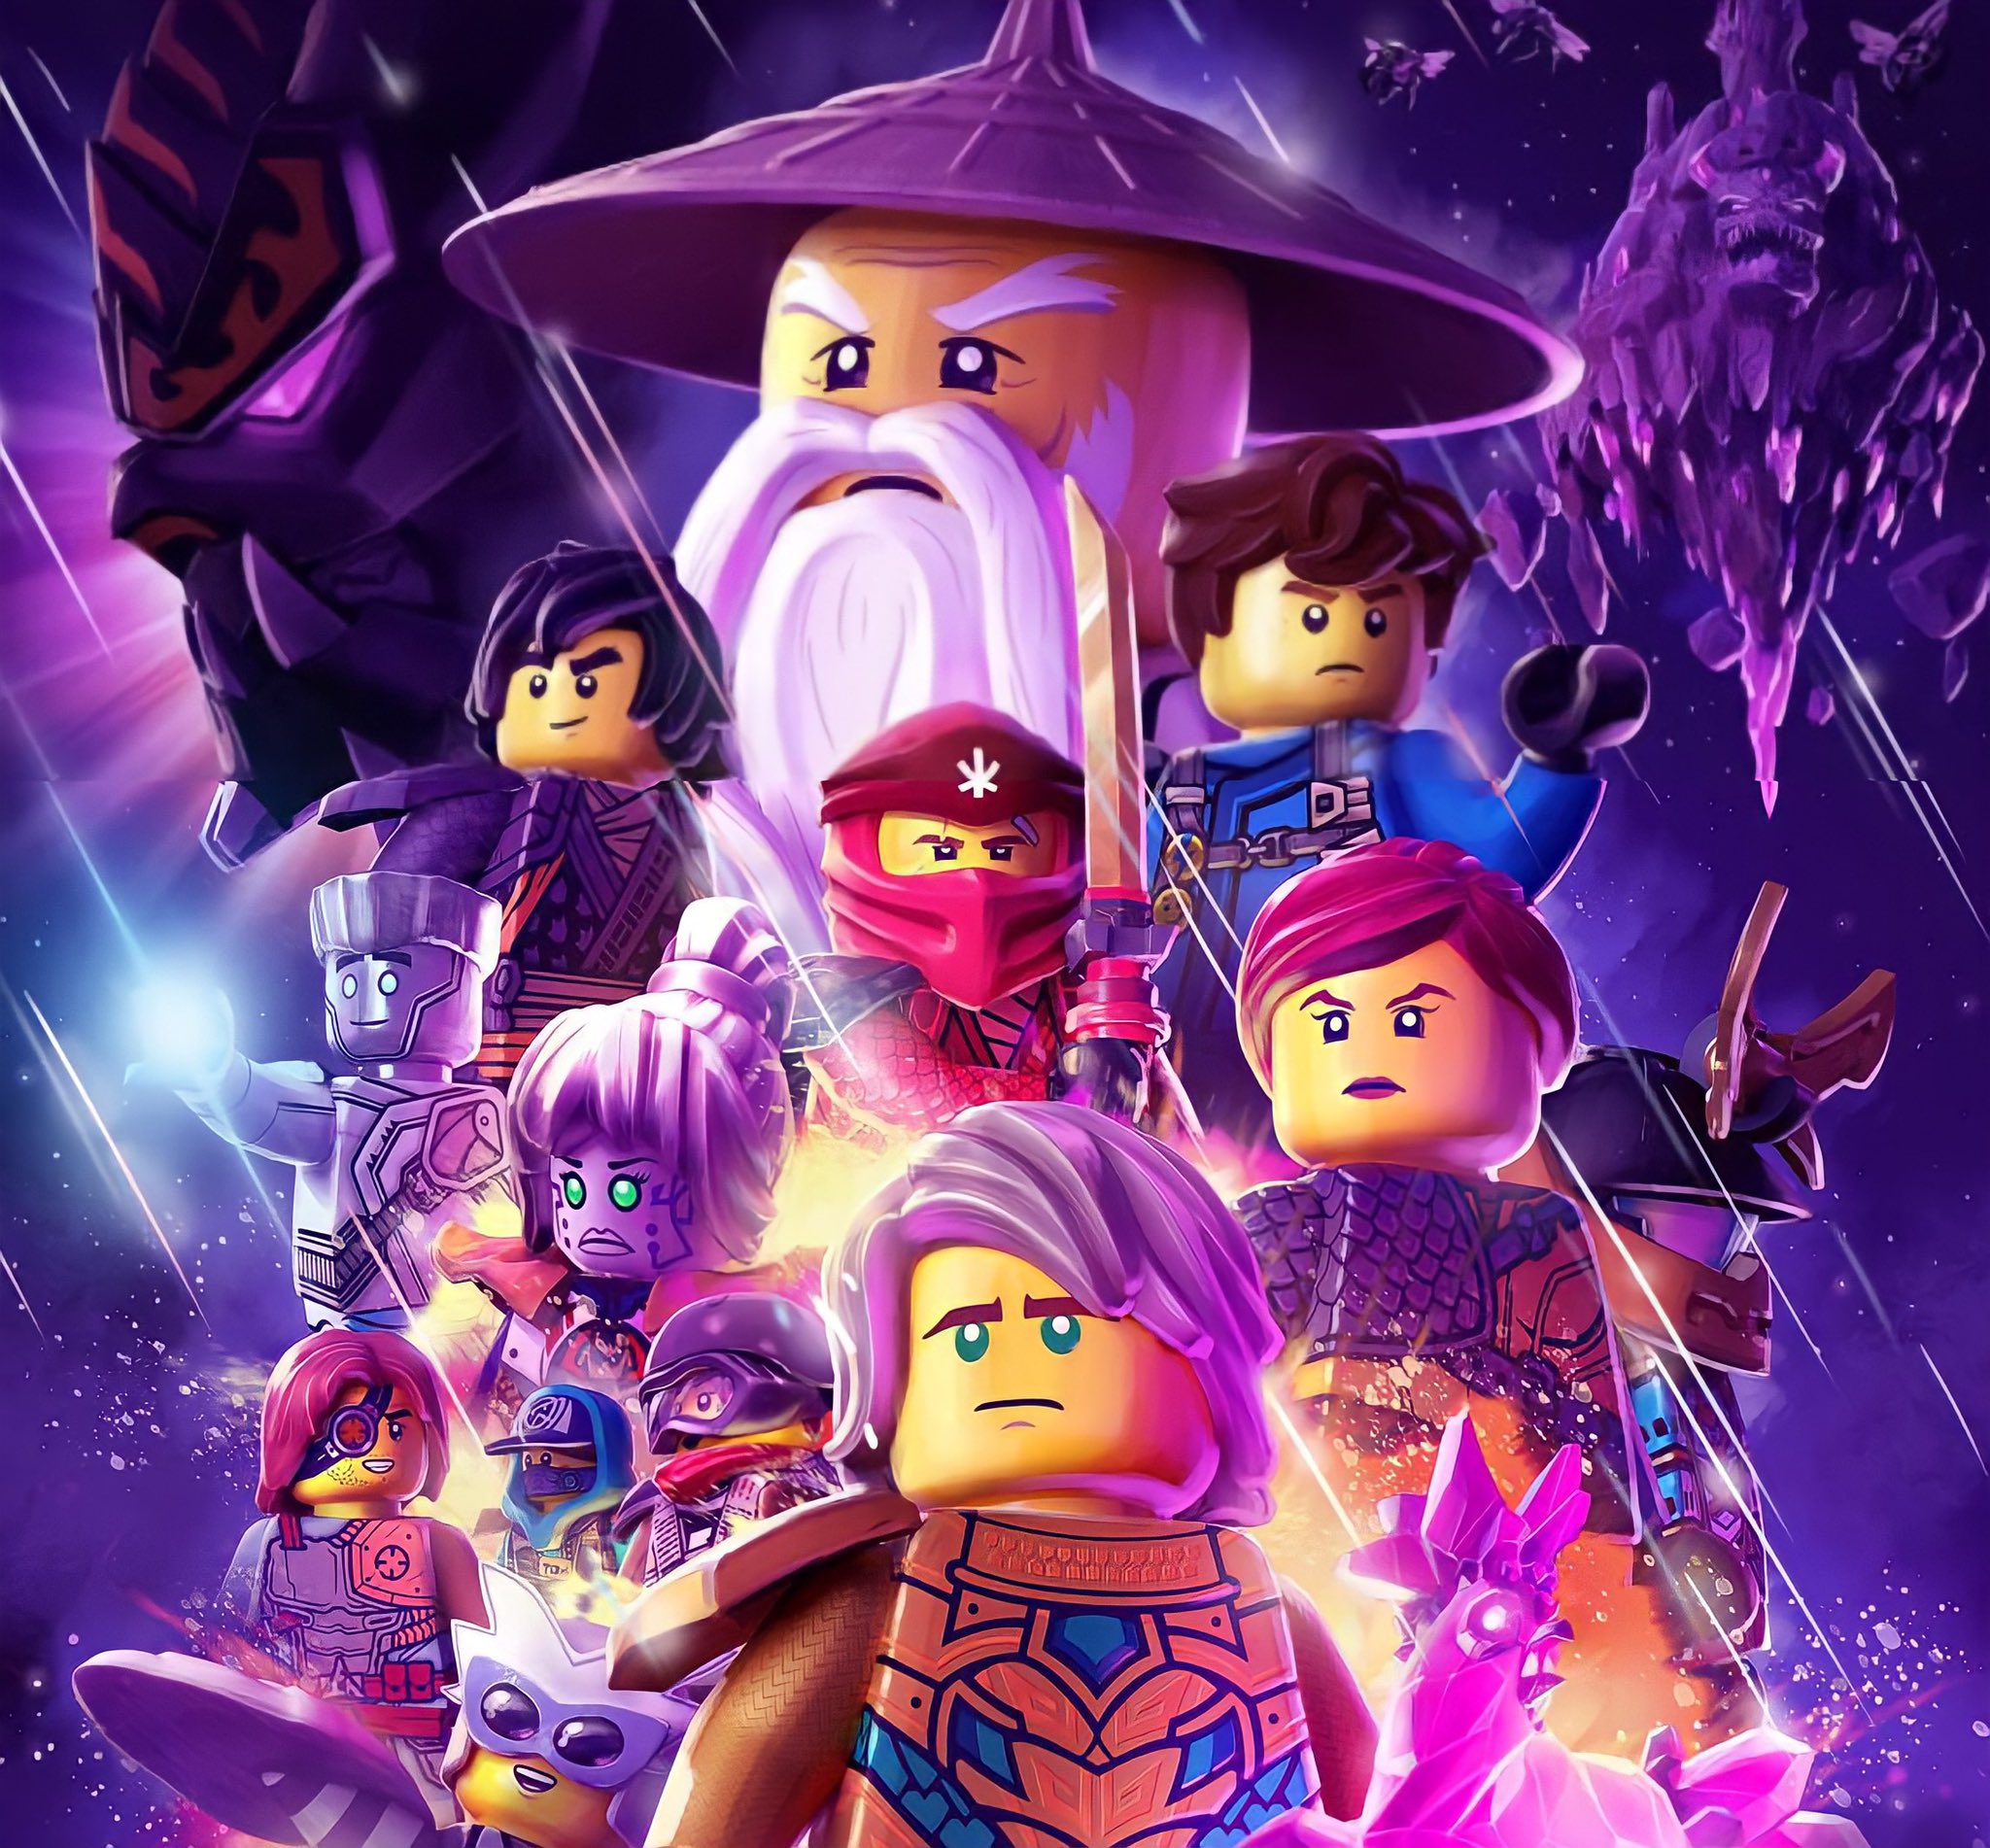 Cartoon Crave poster for 'NINJAGO: Crystalized' (season 15) has been released